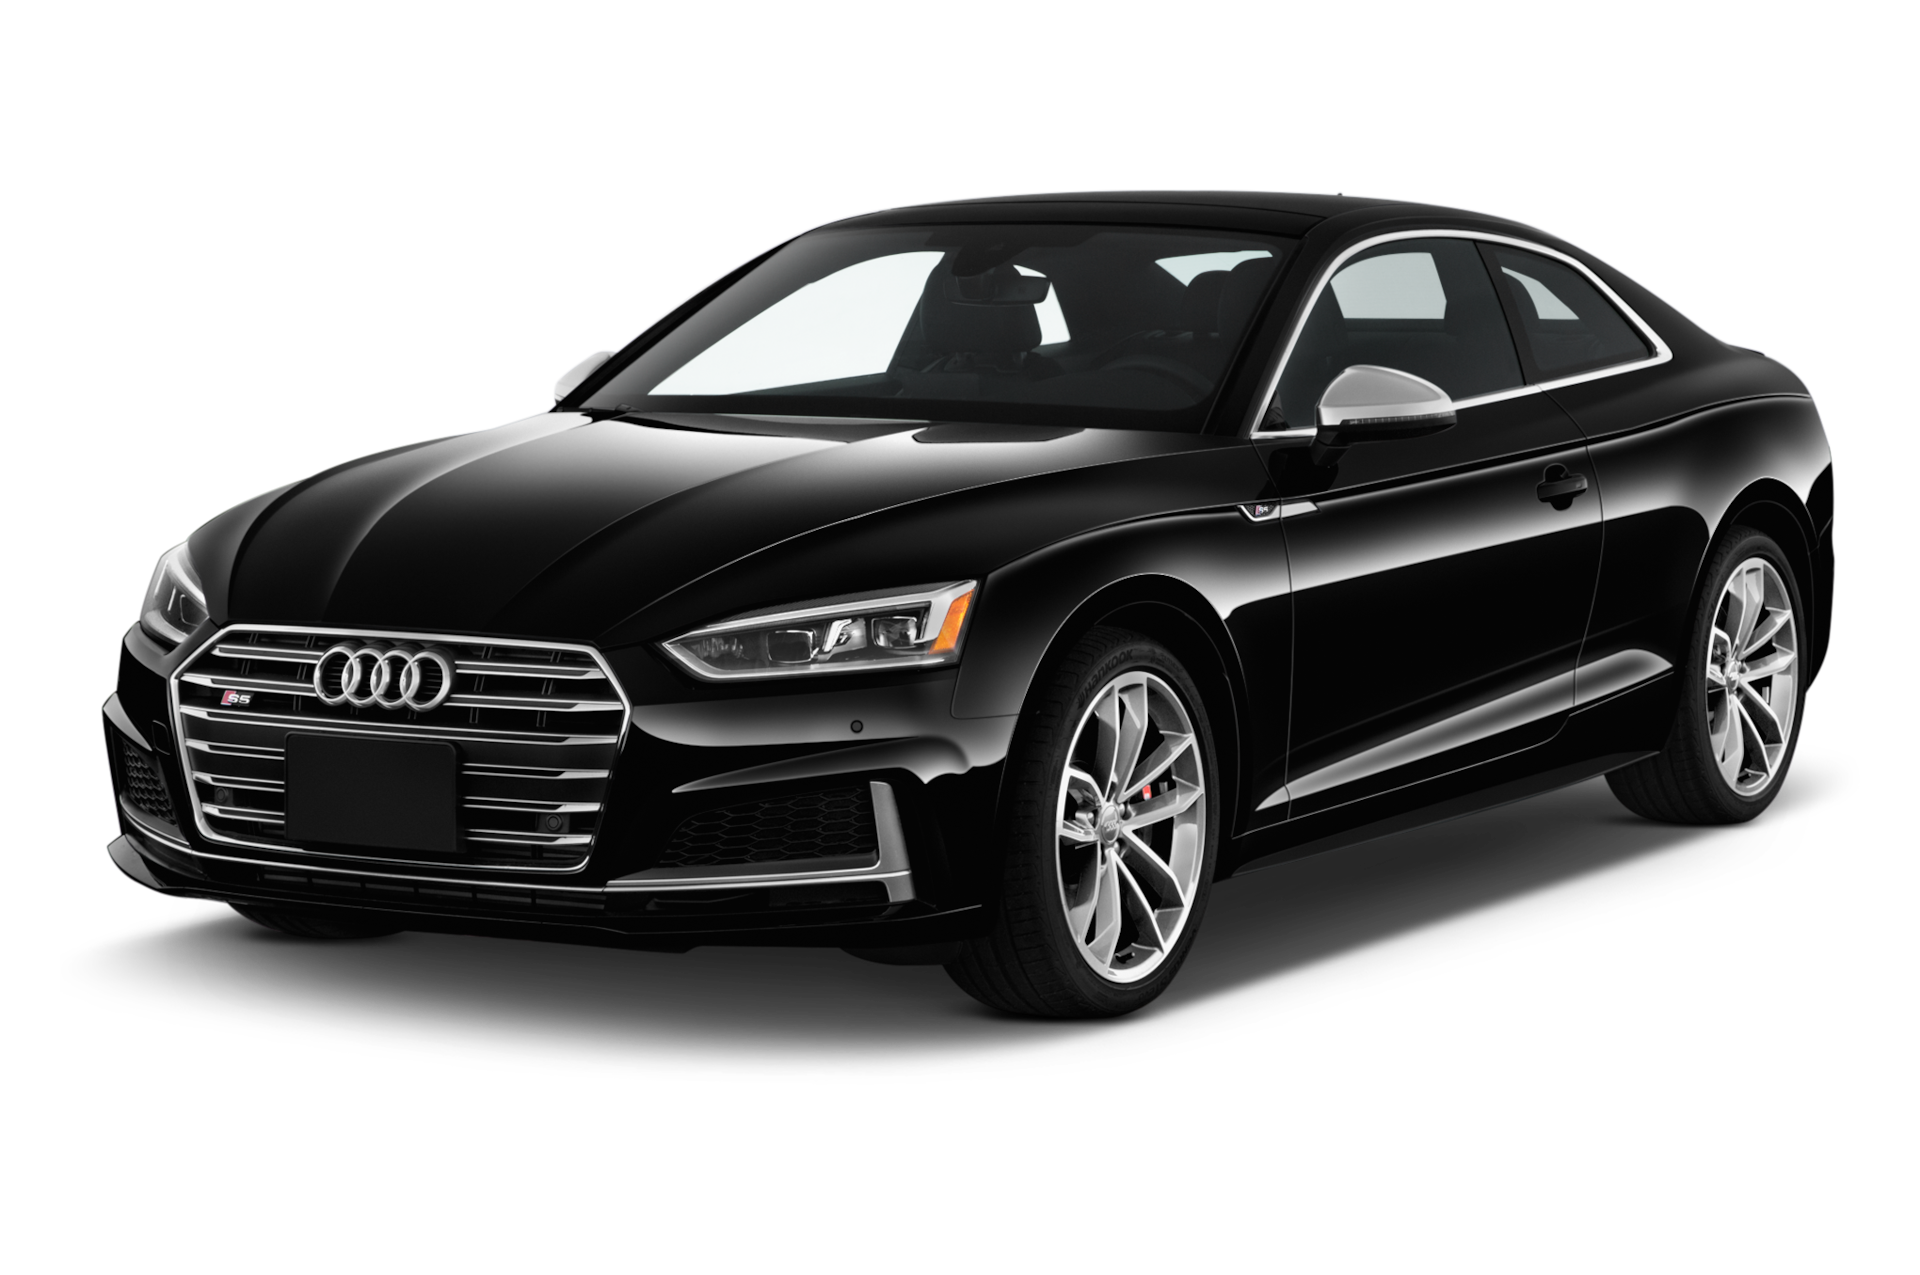 2018 Audi S5 Prices, Reviews, and Photos - MotorTrend